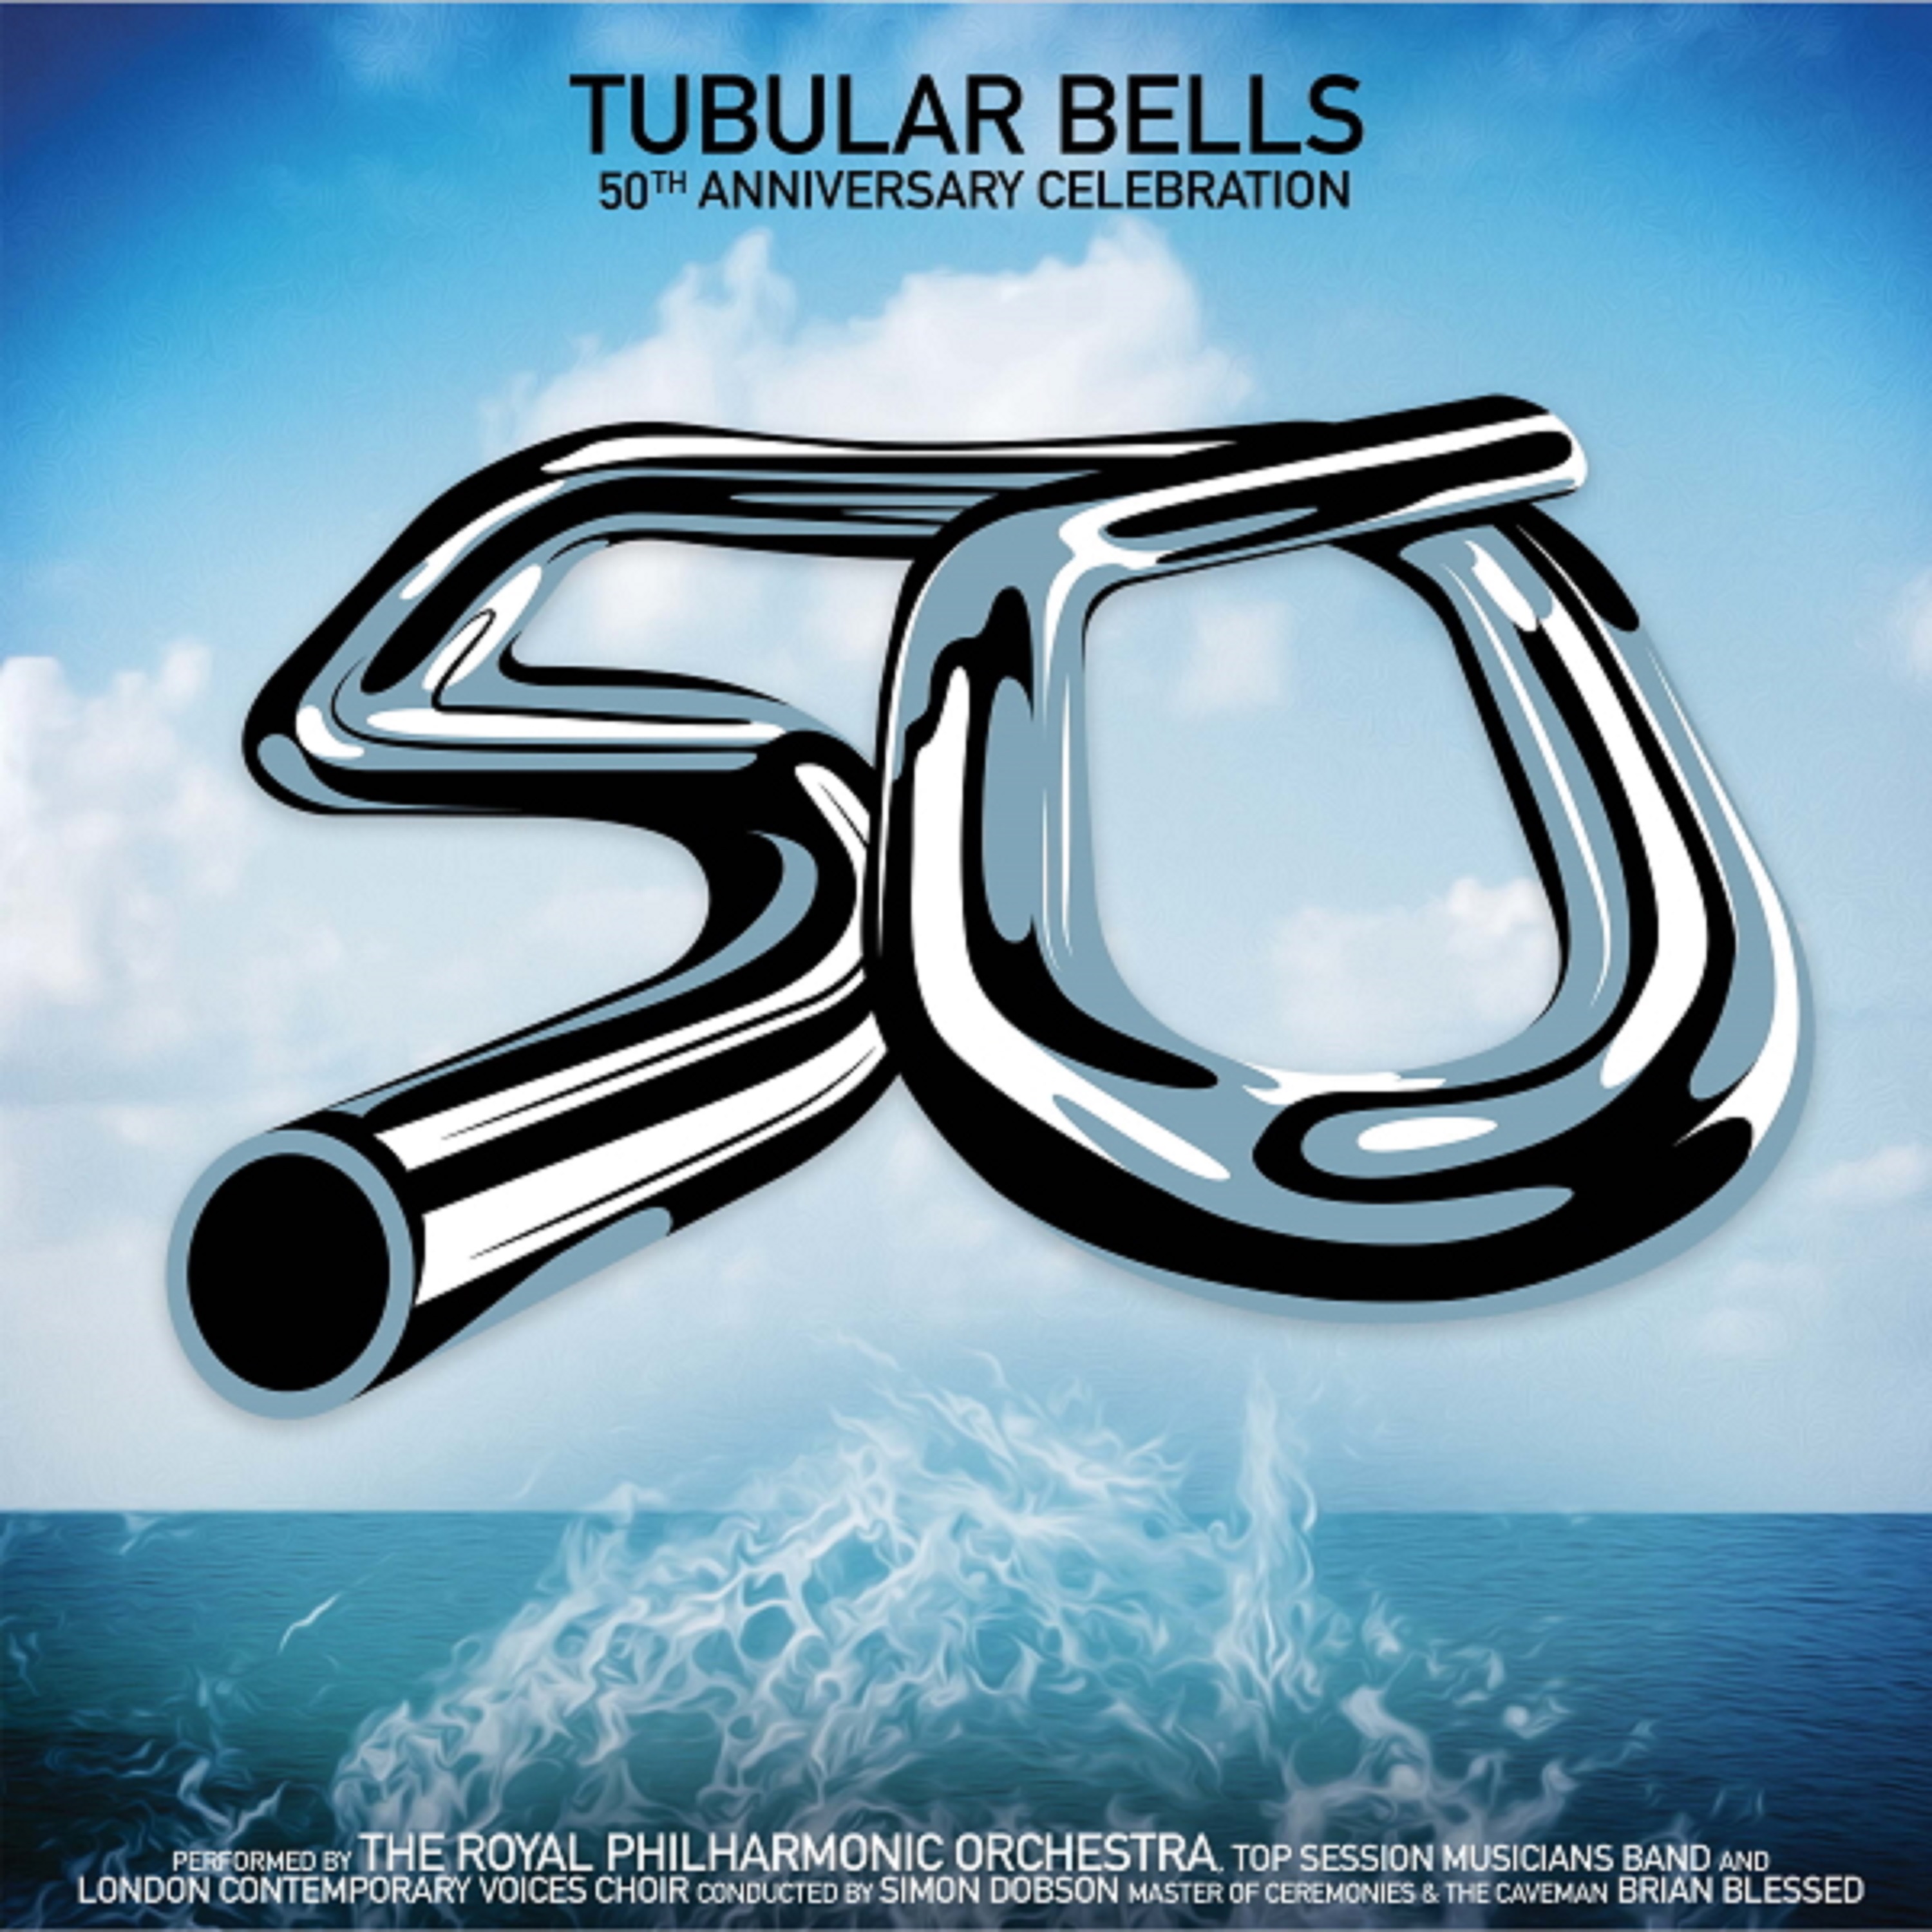 Mike Oldfield’s TUBULAR BELLS Celebrates Its 50TH Anniversary With A Brand New Recording By THE ROYAL PHILHARMONIC ORCHESTRA!